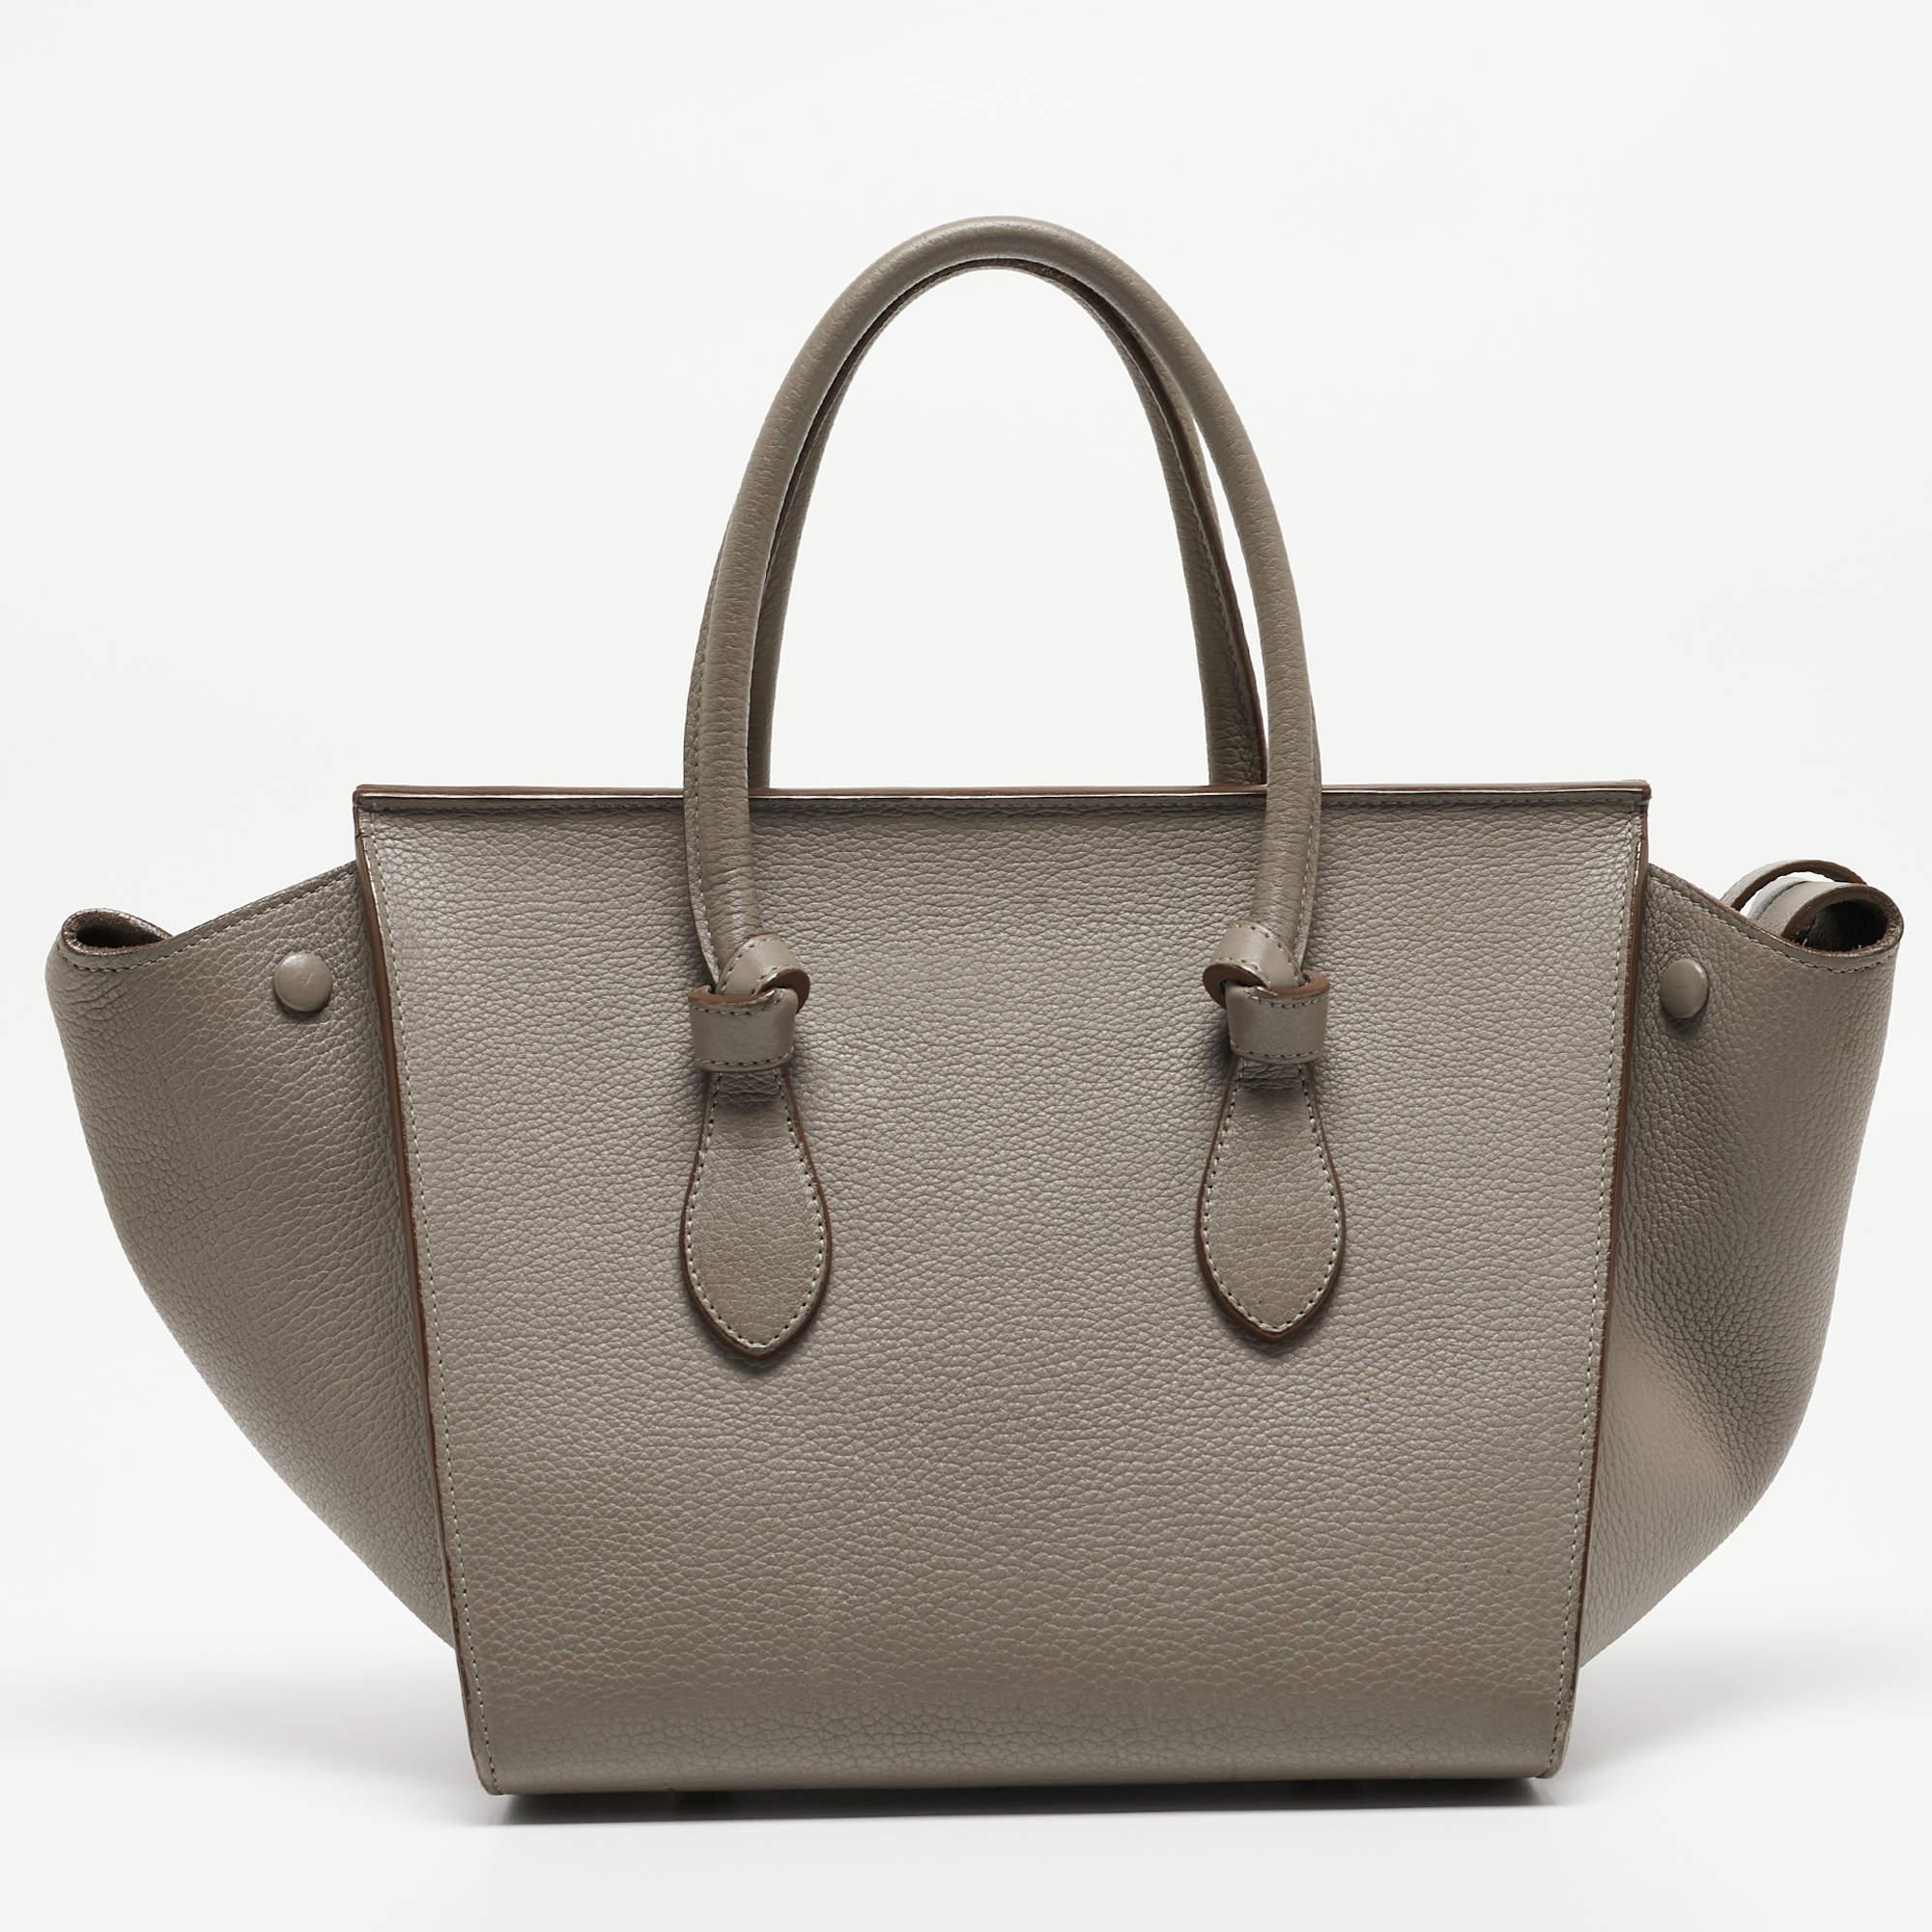 This alluring tote bag for women has been designed to assist you on any day. Convenient to carry and fashionably designed, the tote is cut with skill and sewn into a great shape. It is well-equipped to be a reliable accessory.

